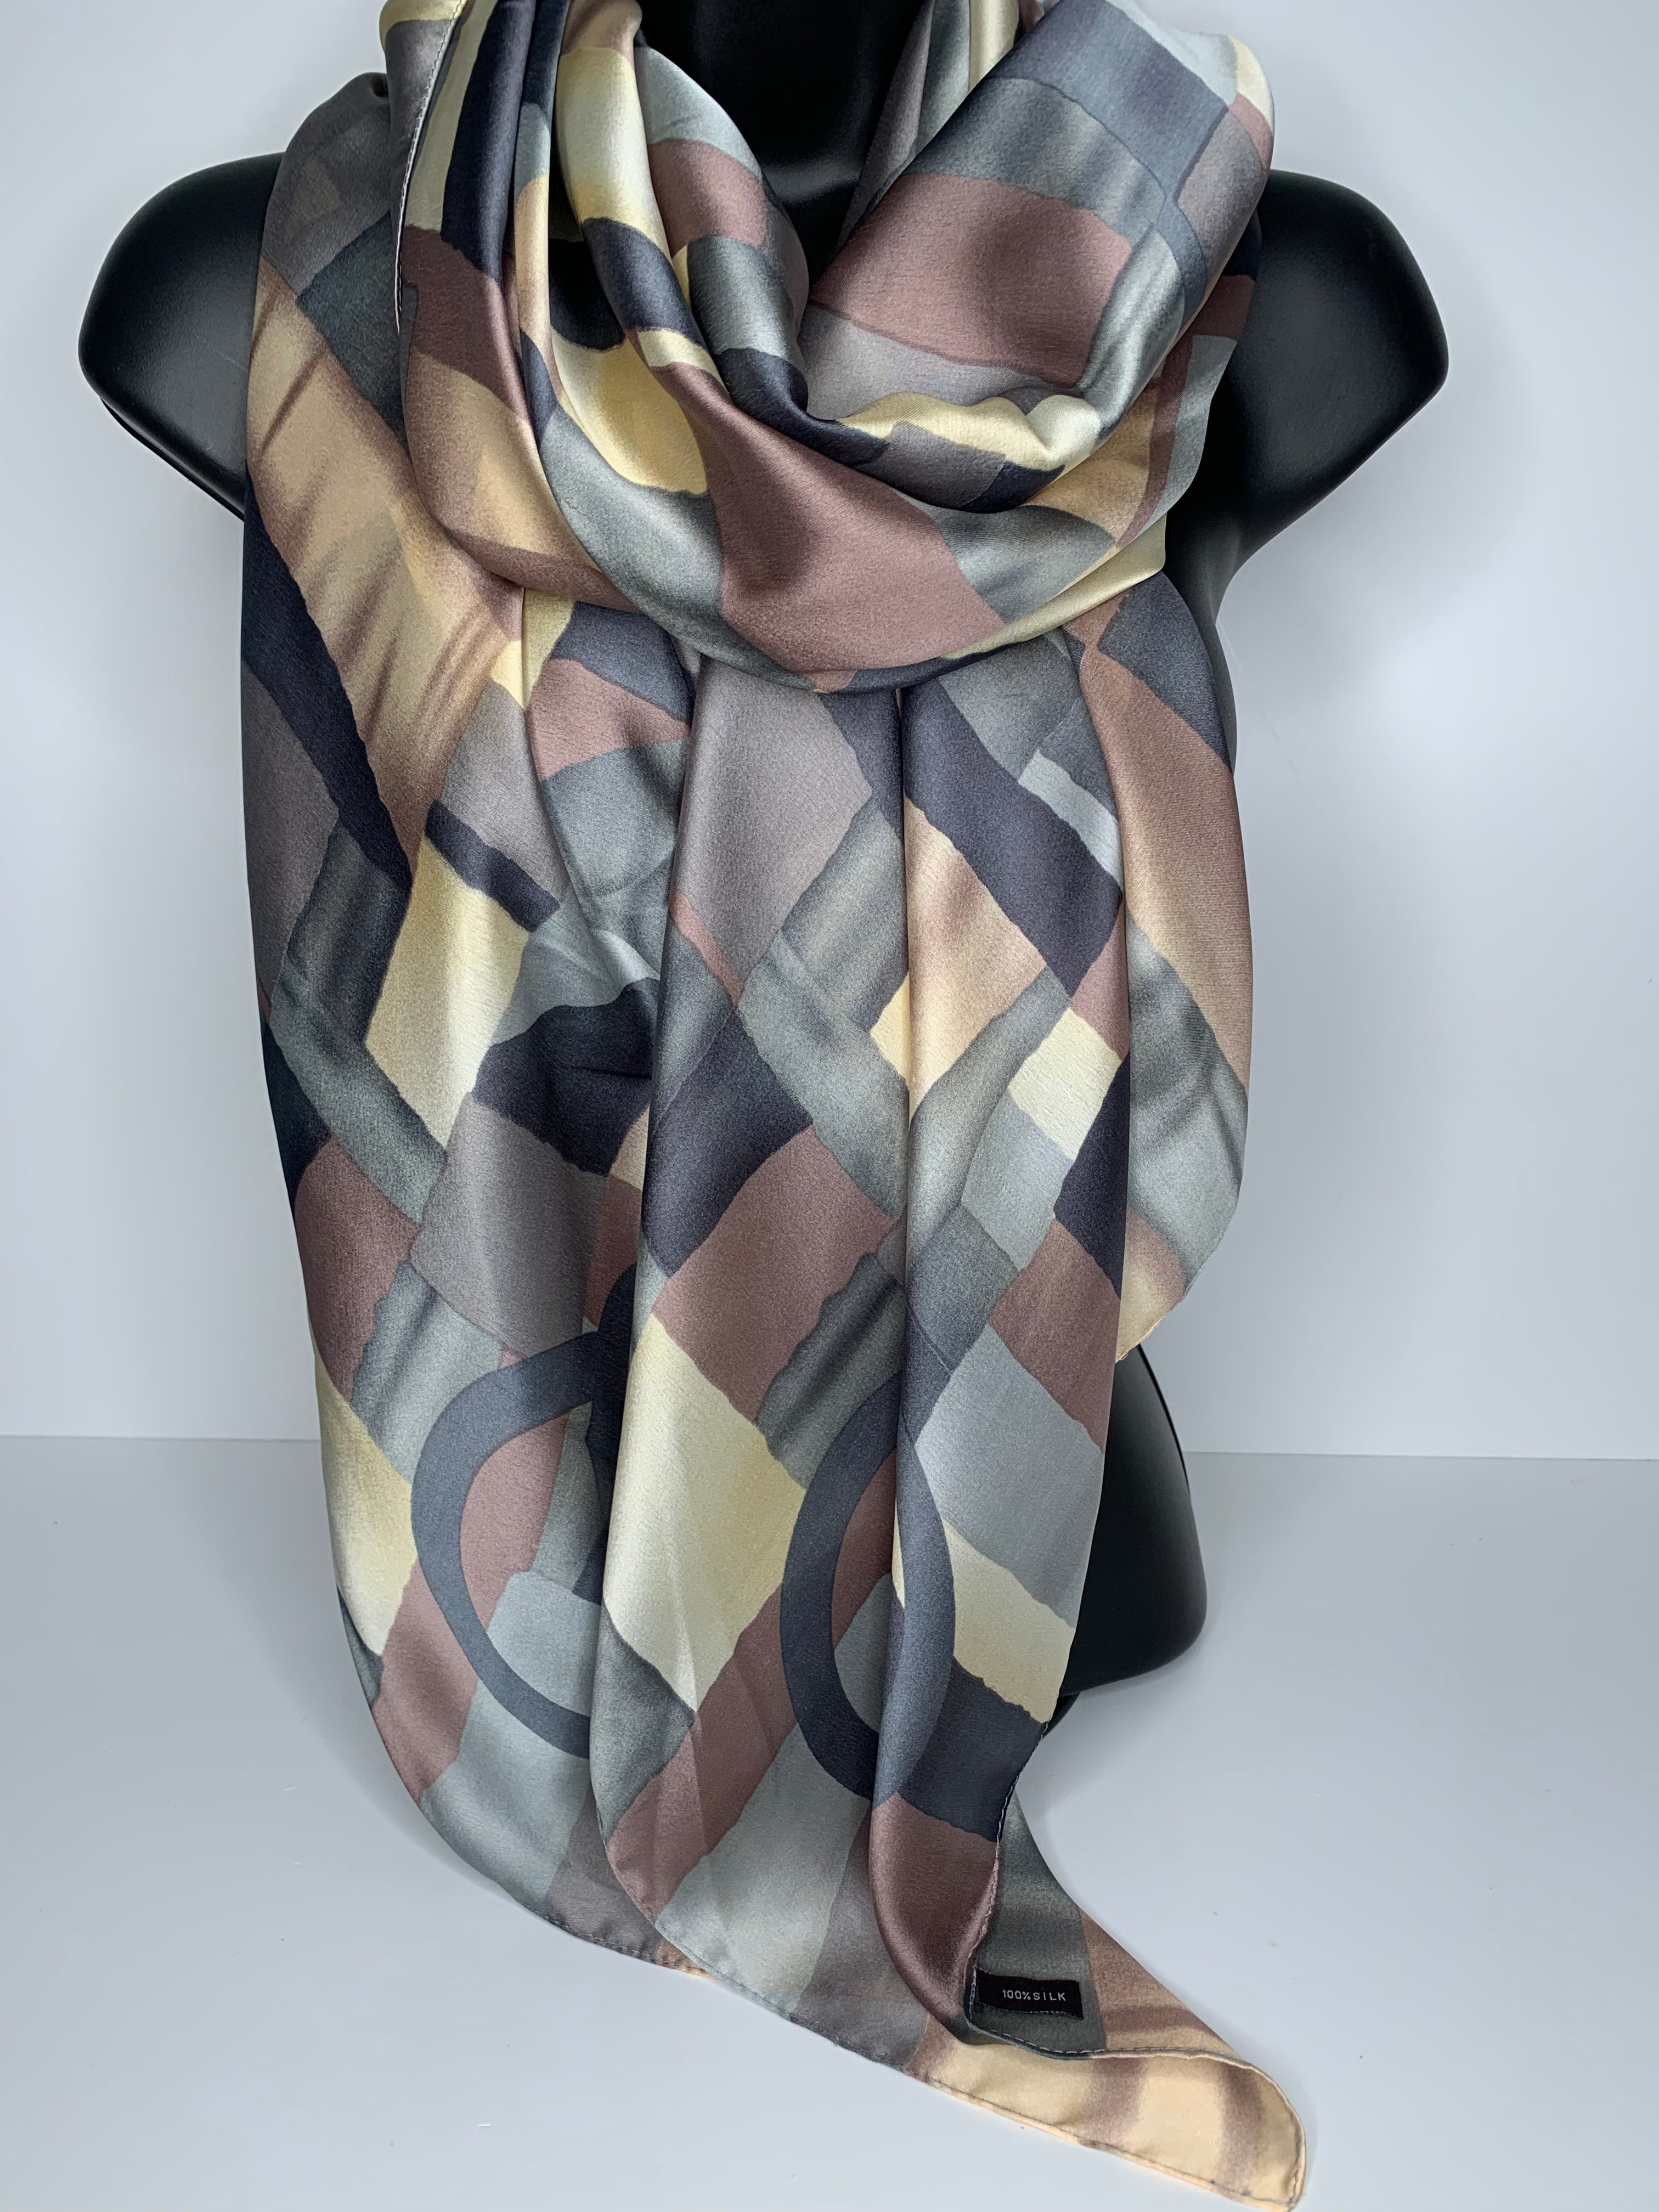 100% Silk luxurious scarf in shades of cream, grey and champagne